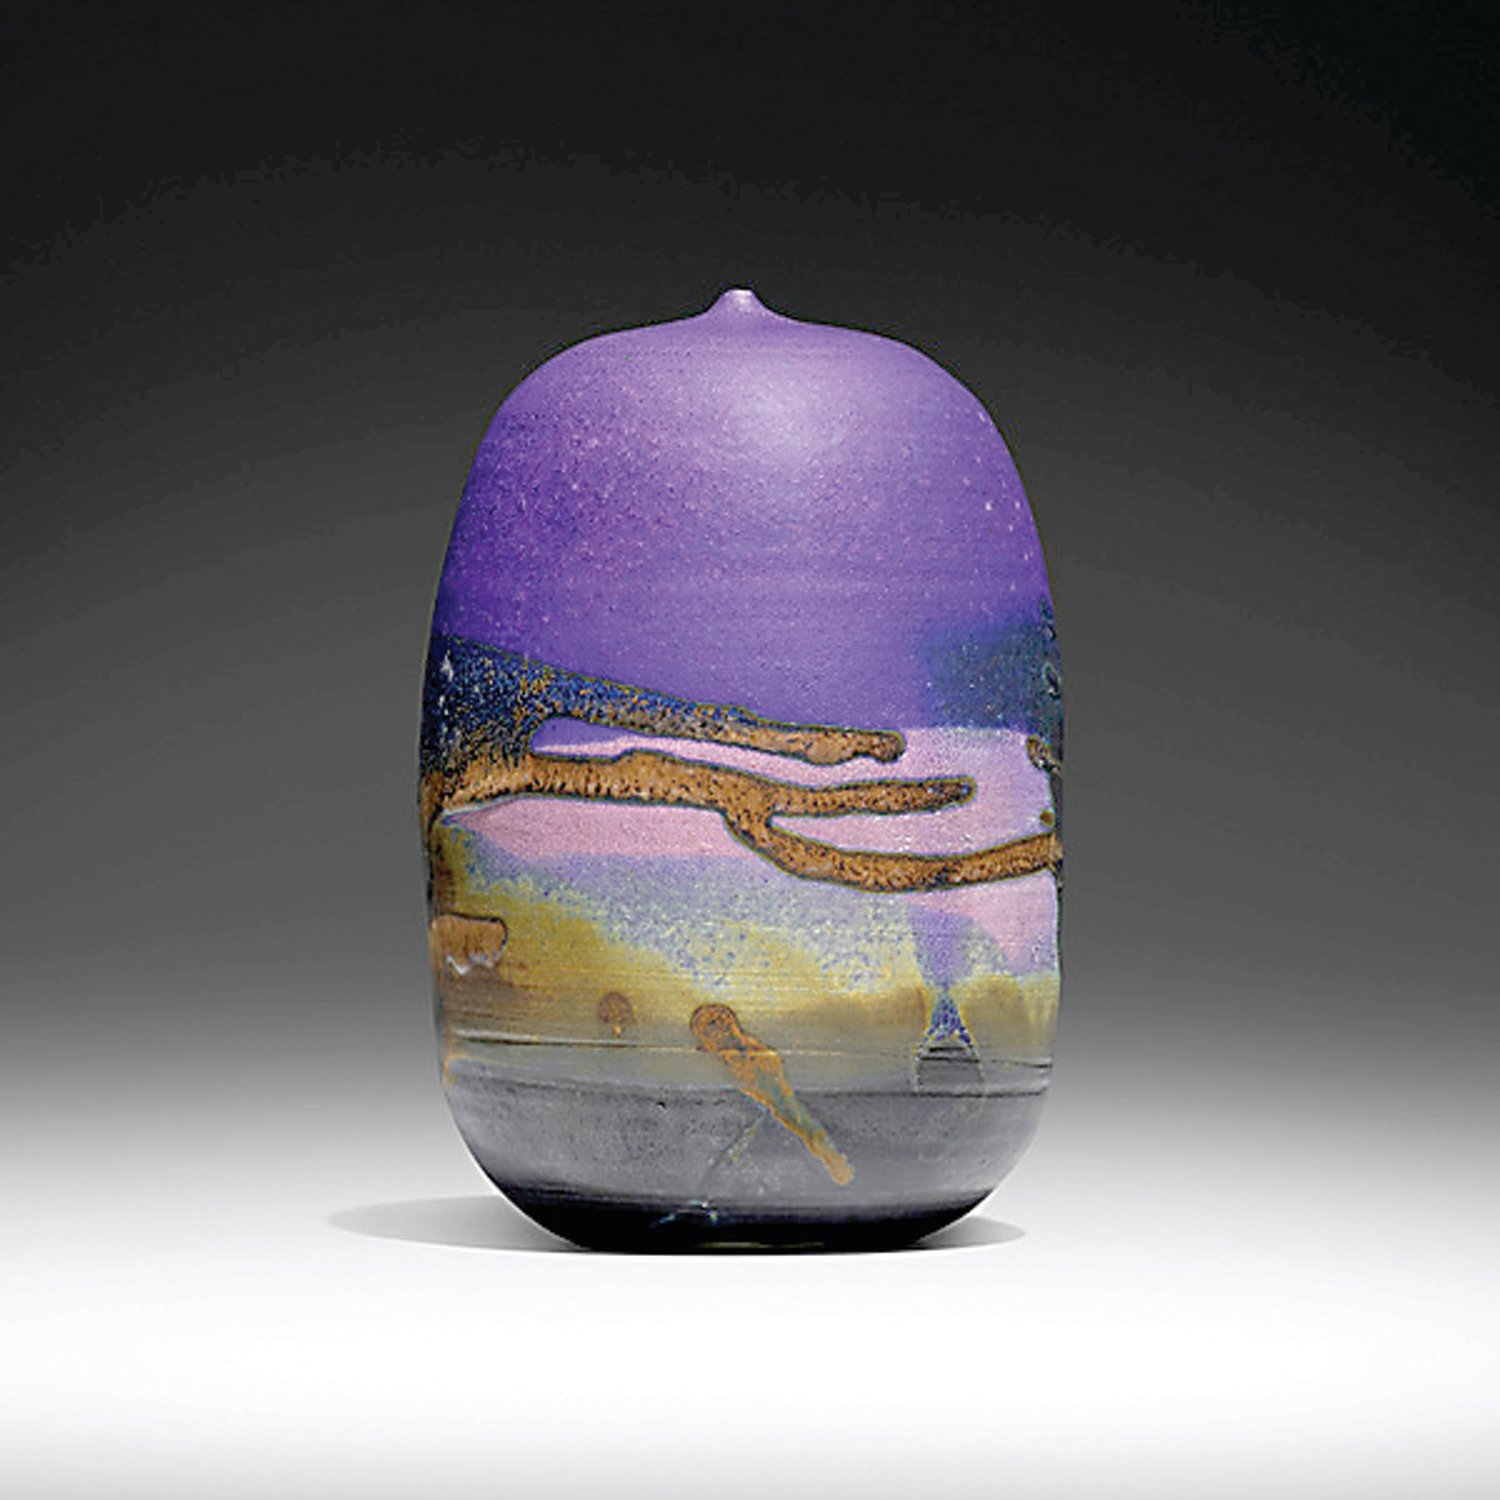 An untitled ceramic vessel with a rattle by Toshiko Takaezu is among the pieces up for auction in “A Quiet Revolution: The Ceramics of Toshiko Takaezu.”